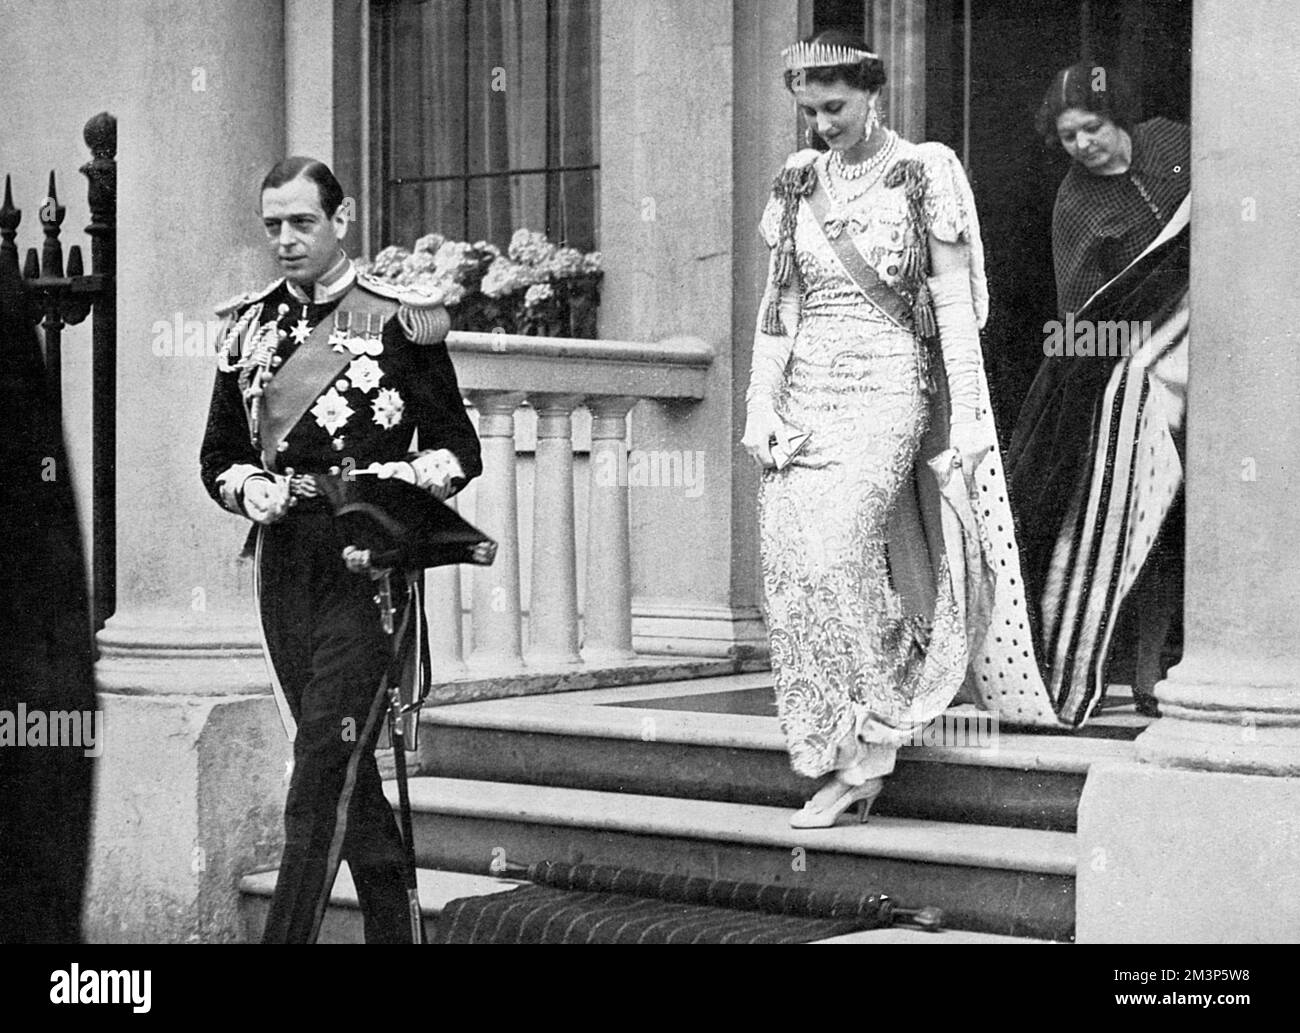 George, Duke of Kent (1902-1942) in naval uniform and his wife, Marina, Duchess of Kent leaving their home at 3 Belgrave Square for Buckingham Palace prior to the Coronation of the Duke's elder brother, King George VI on 12 May 1937.        Date: 1937 Stock Photo